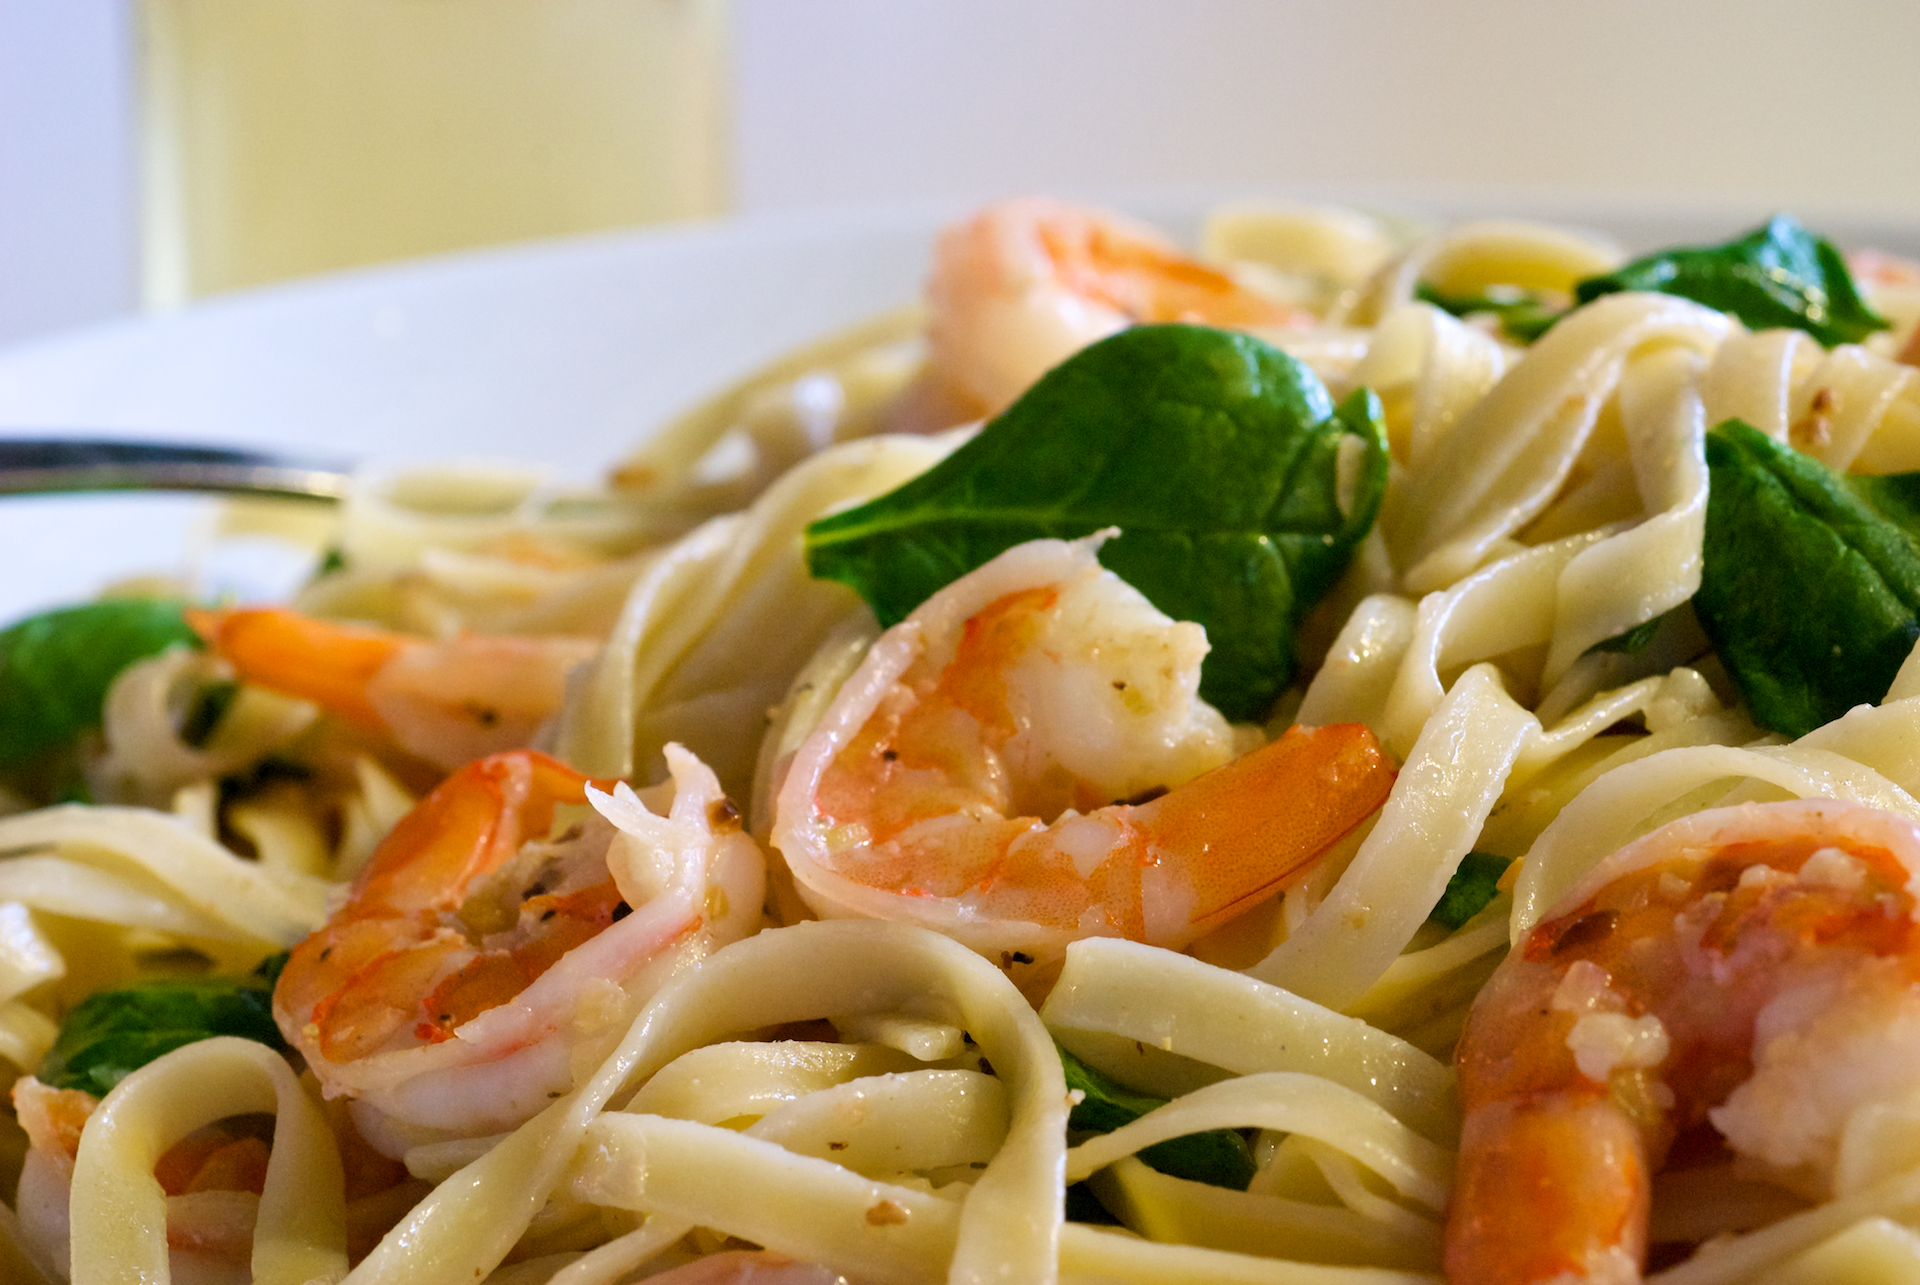 Many shrimp scampi recipes are overloaded with butter; this recipe is balanced with a blend of butter and monounsaturated olive oil and tossed with fresh baby spinach. It’s rich in B vitamins, omega-3 fatty acids, beta-carotene, calcium and important phytochemicals. 